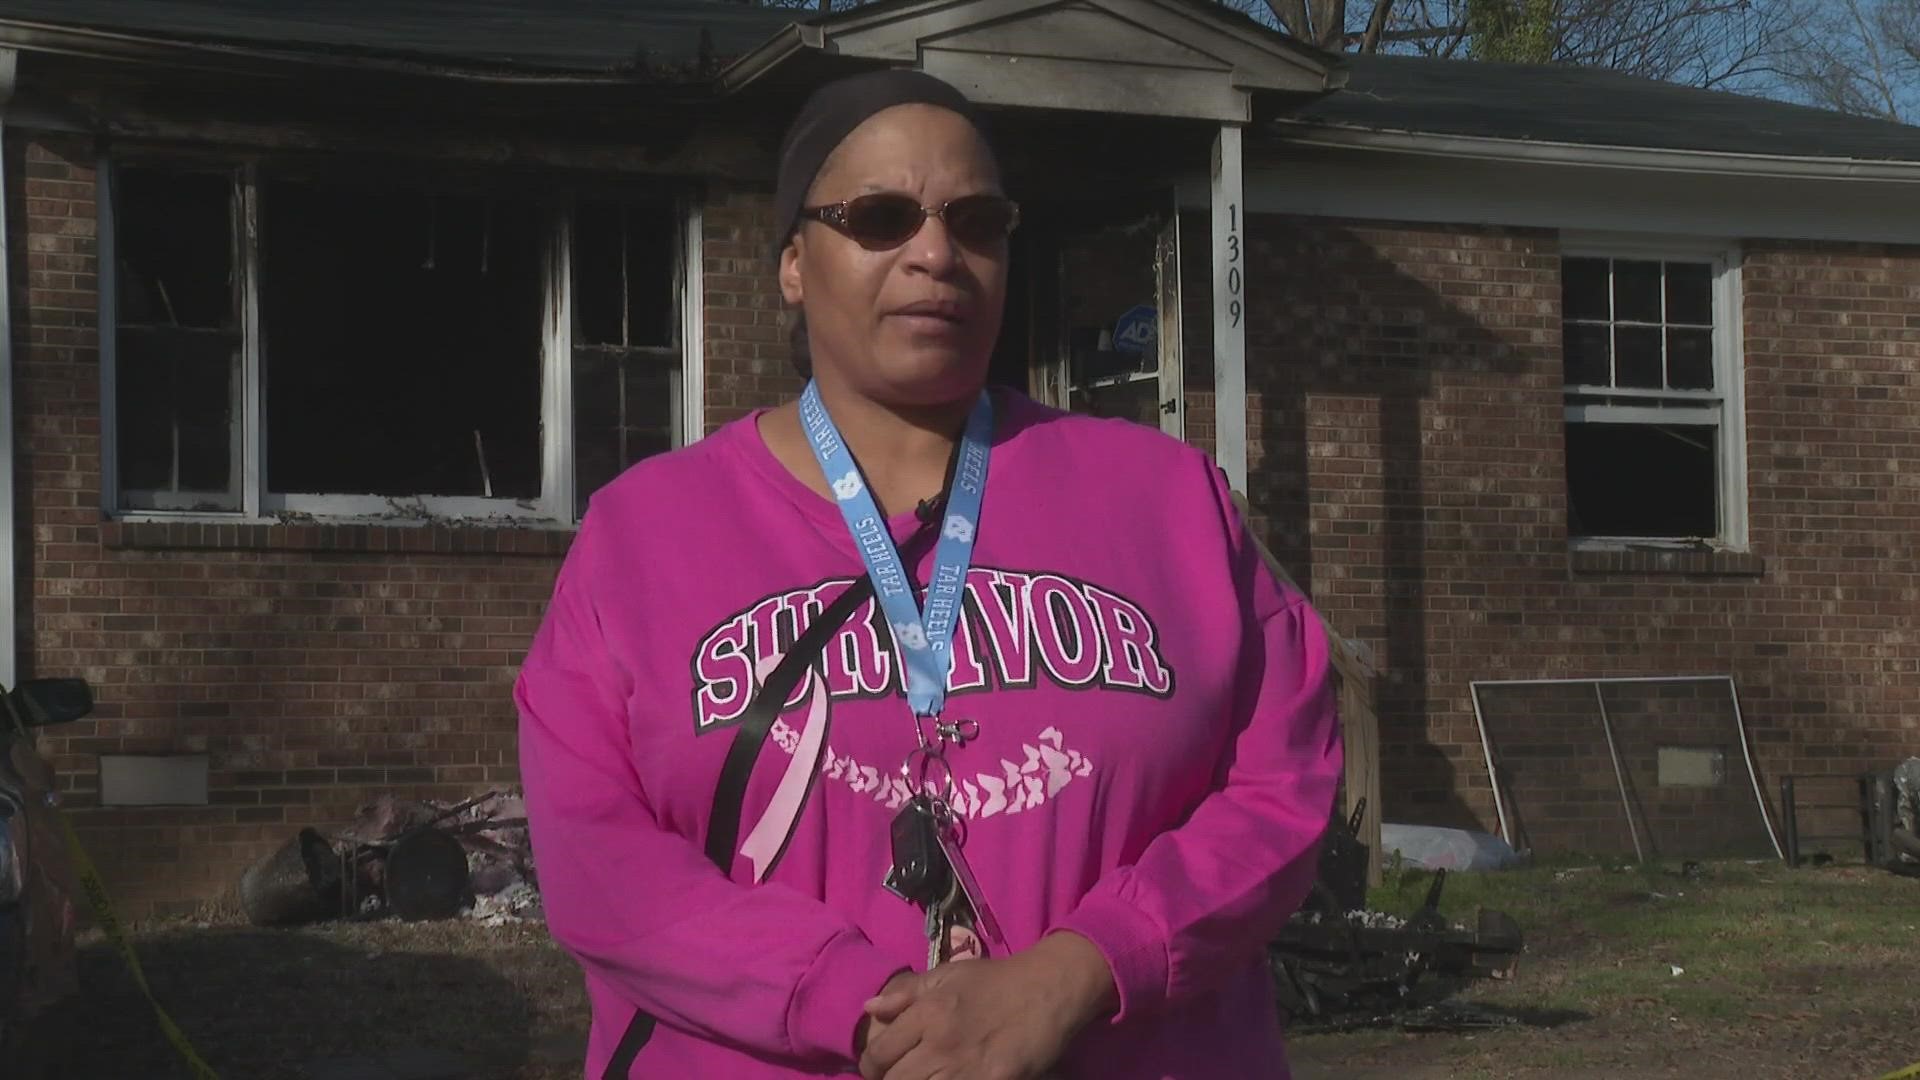 Faulty wiring caused the Washingtons home to catch fire. All they saved were the clothes on their back.